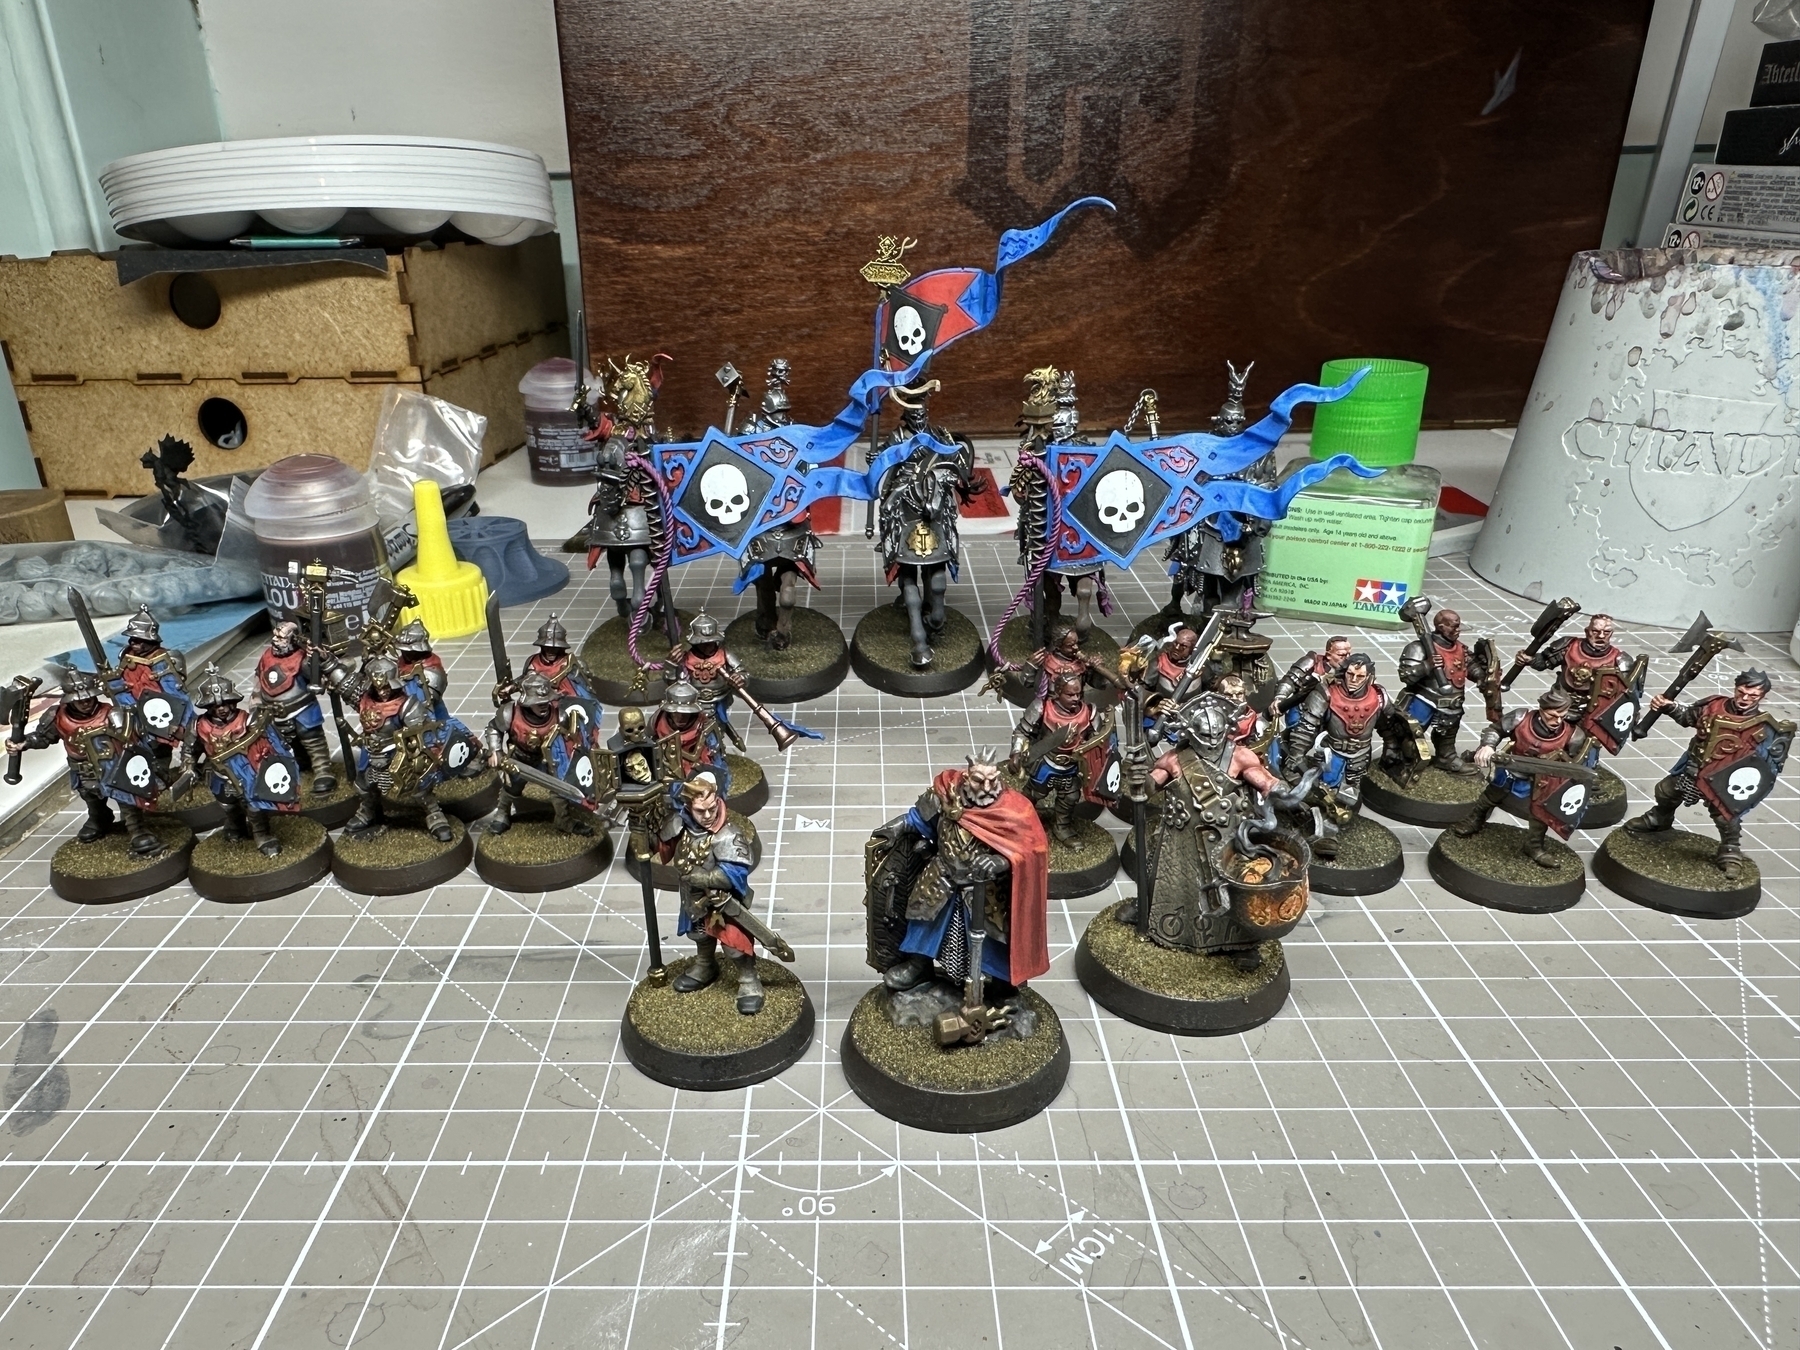 Miniatures from the Cities of Sigmar range, by Games Workshop. They are fully painted and arranged for display. The dominant uniform colours are blue, red, silver, and gold. The army iconography consists of a white skull on a black background